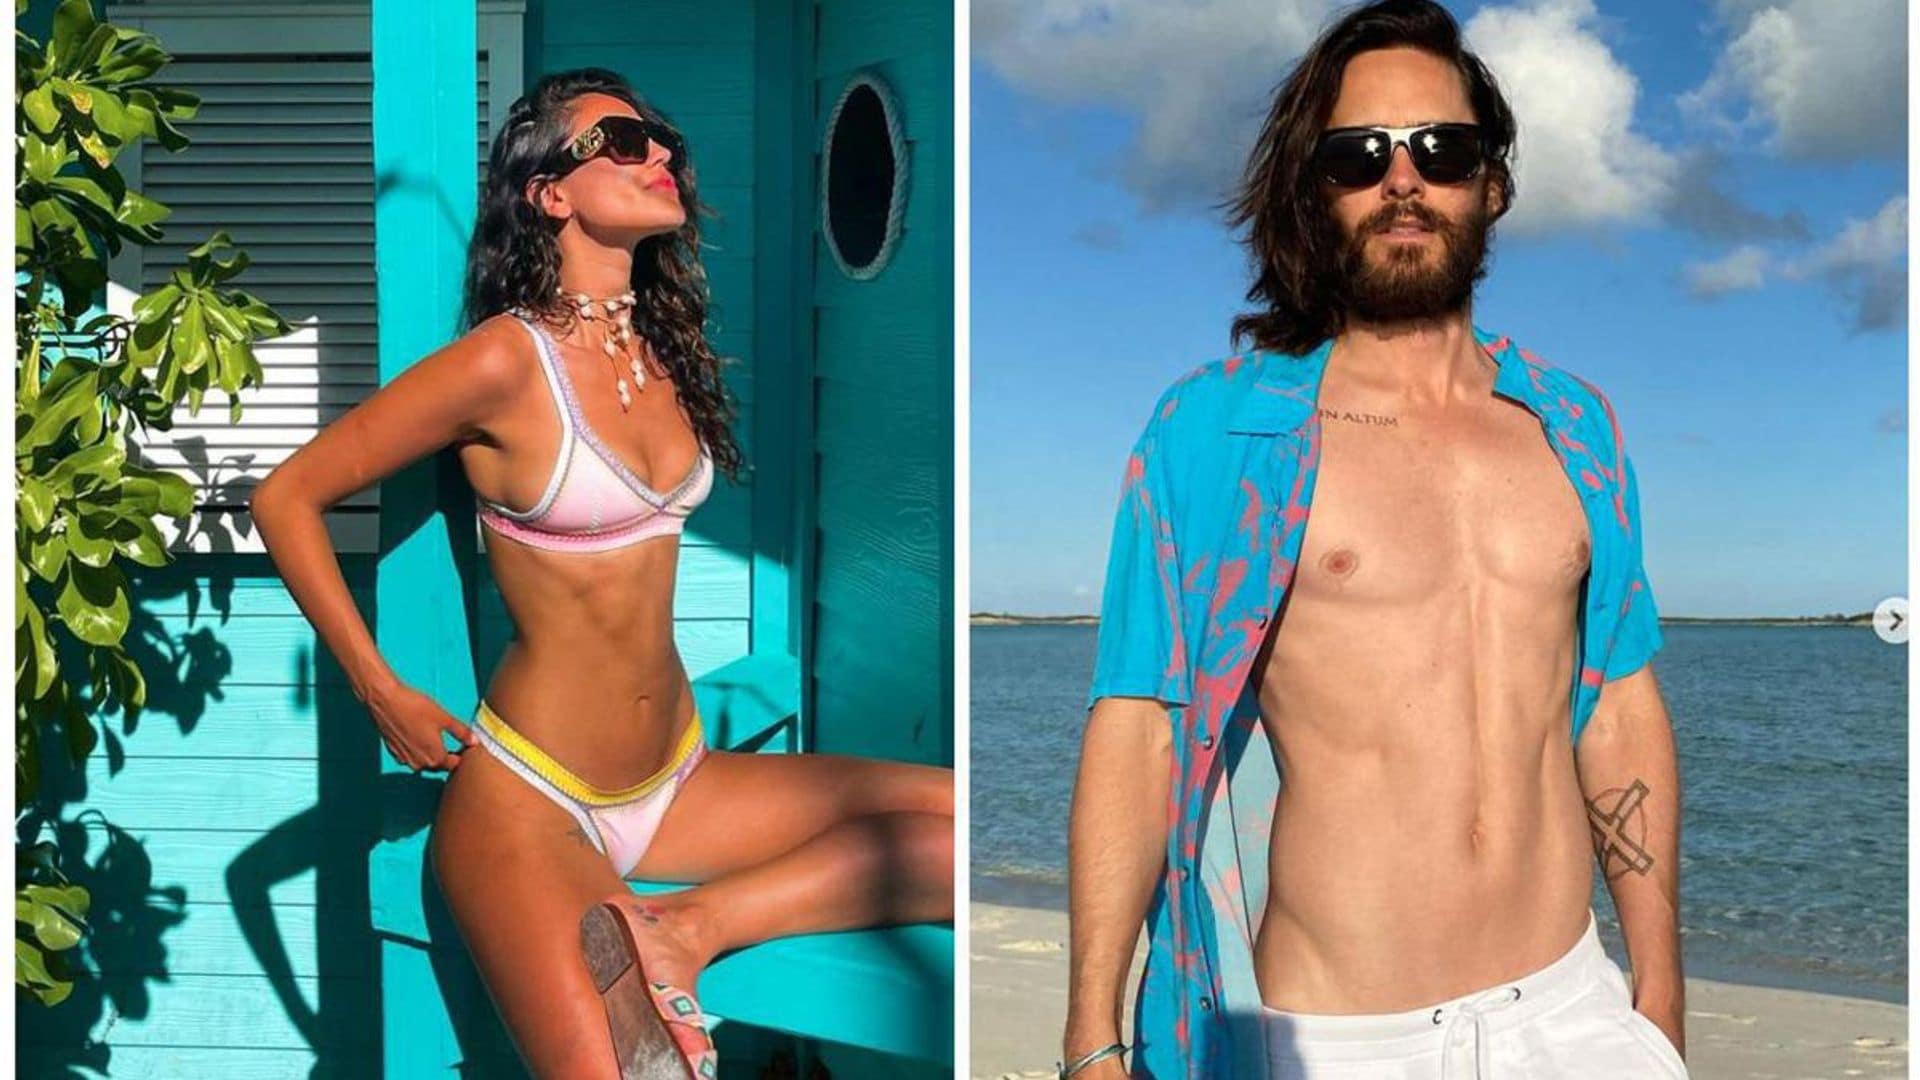 Eiza González lost in paradise with Jared Leto